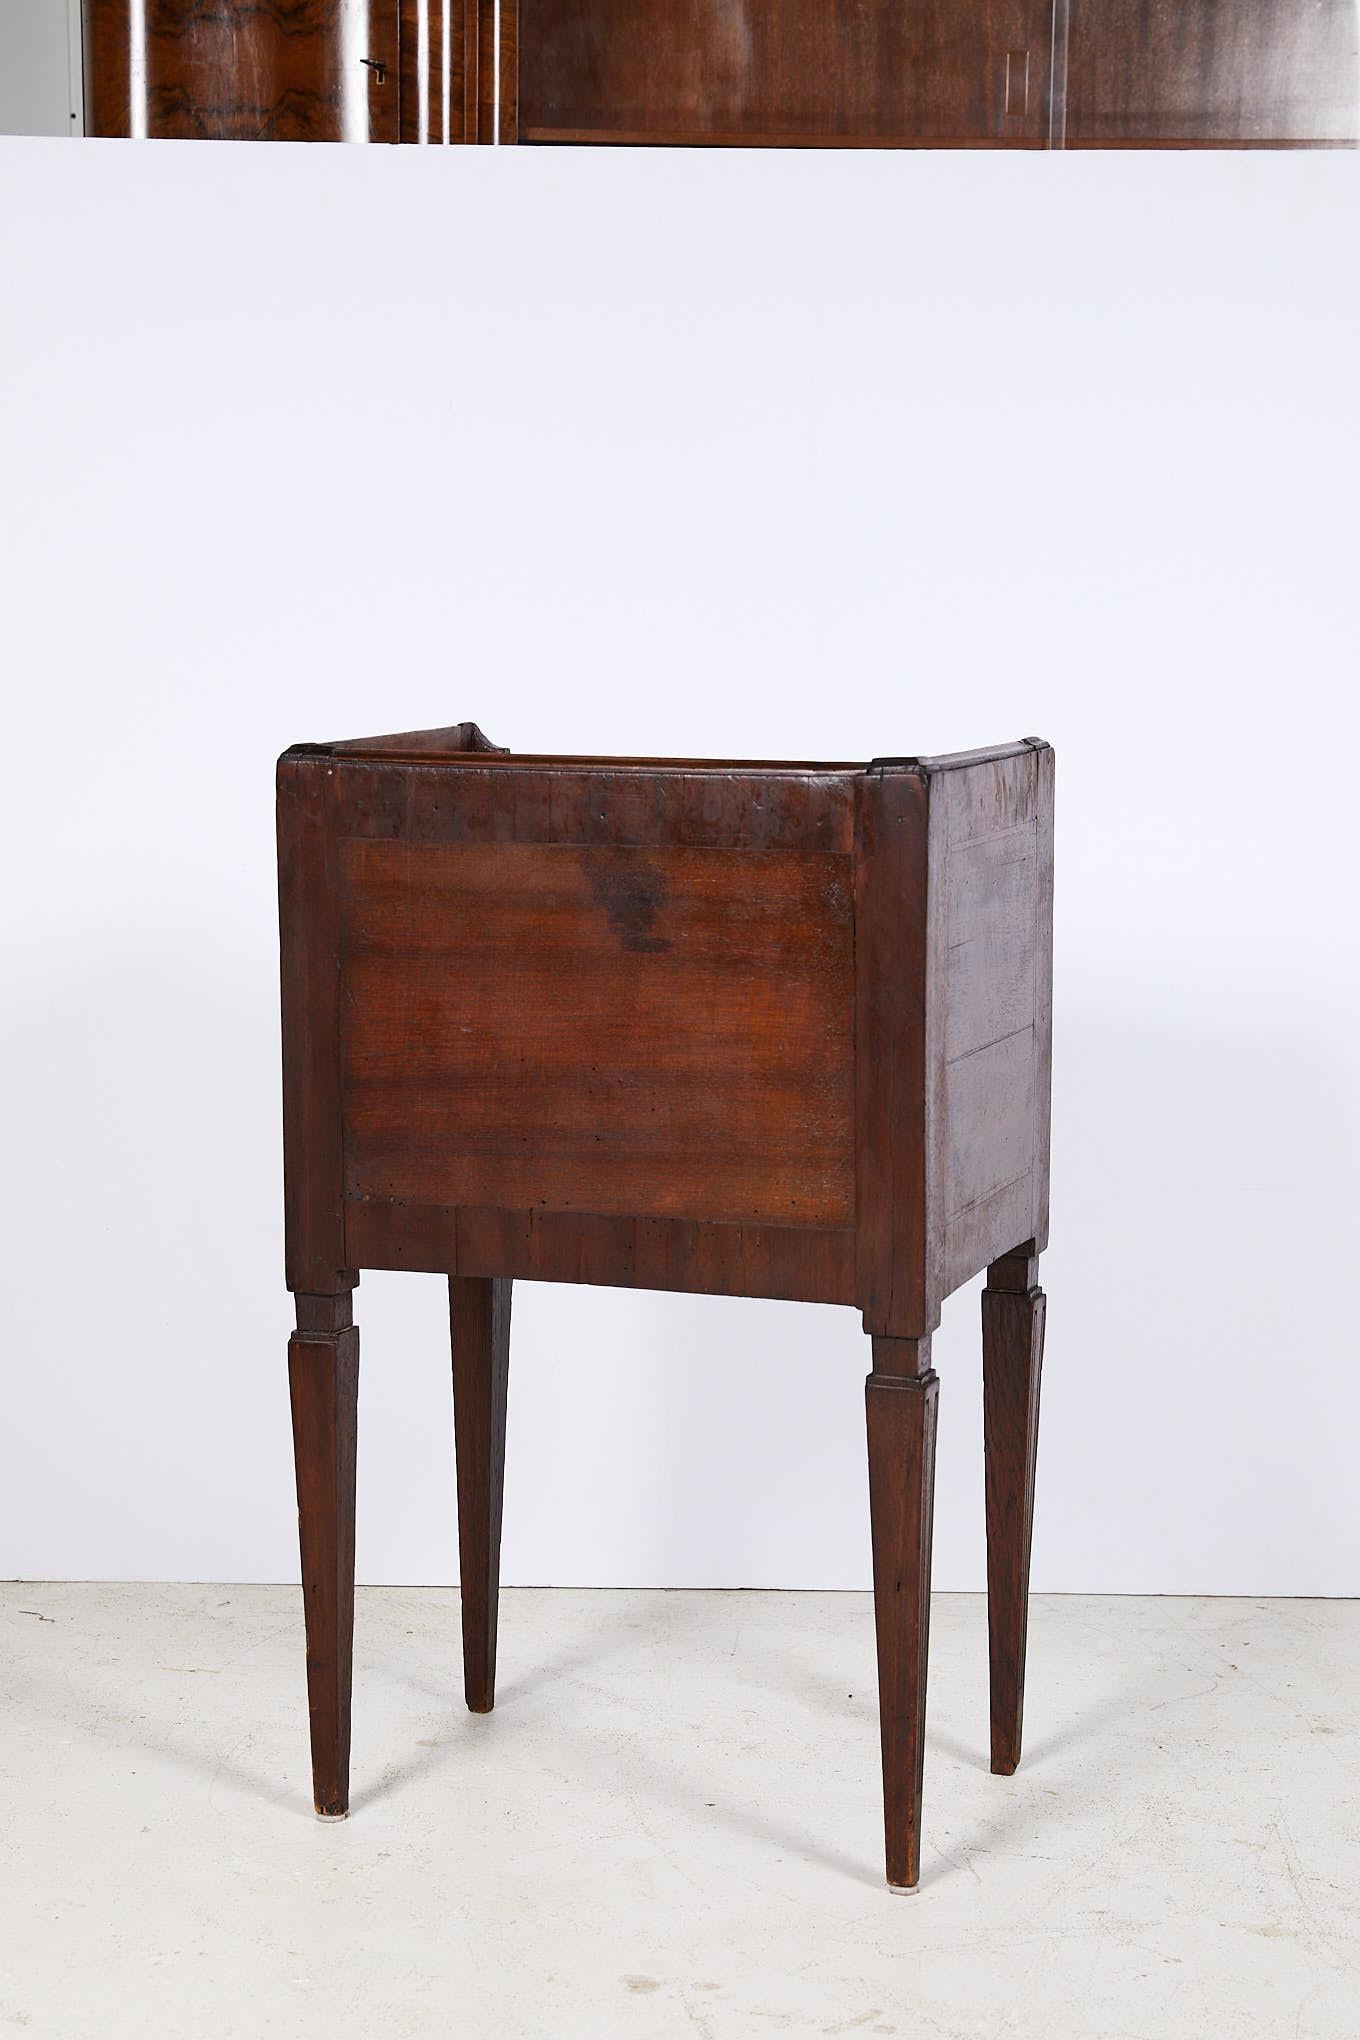 Italian 19th Century Inlaid Tambour Front Side Table